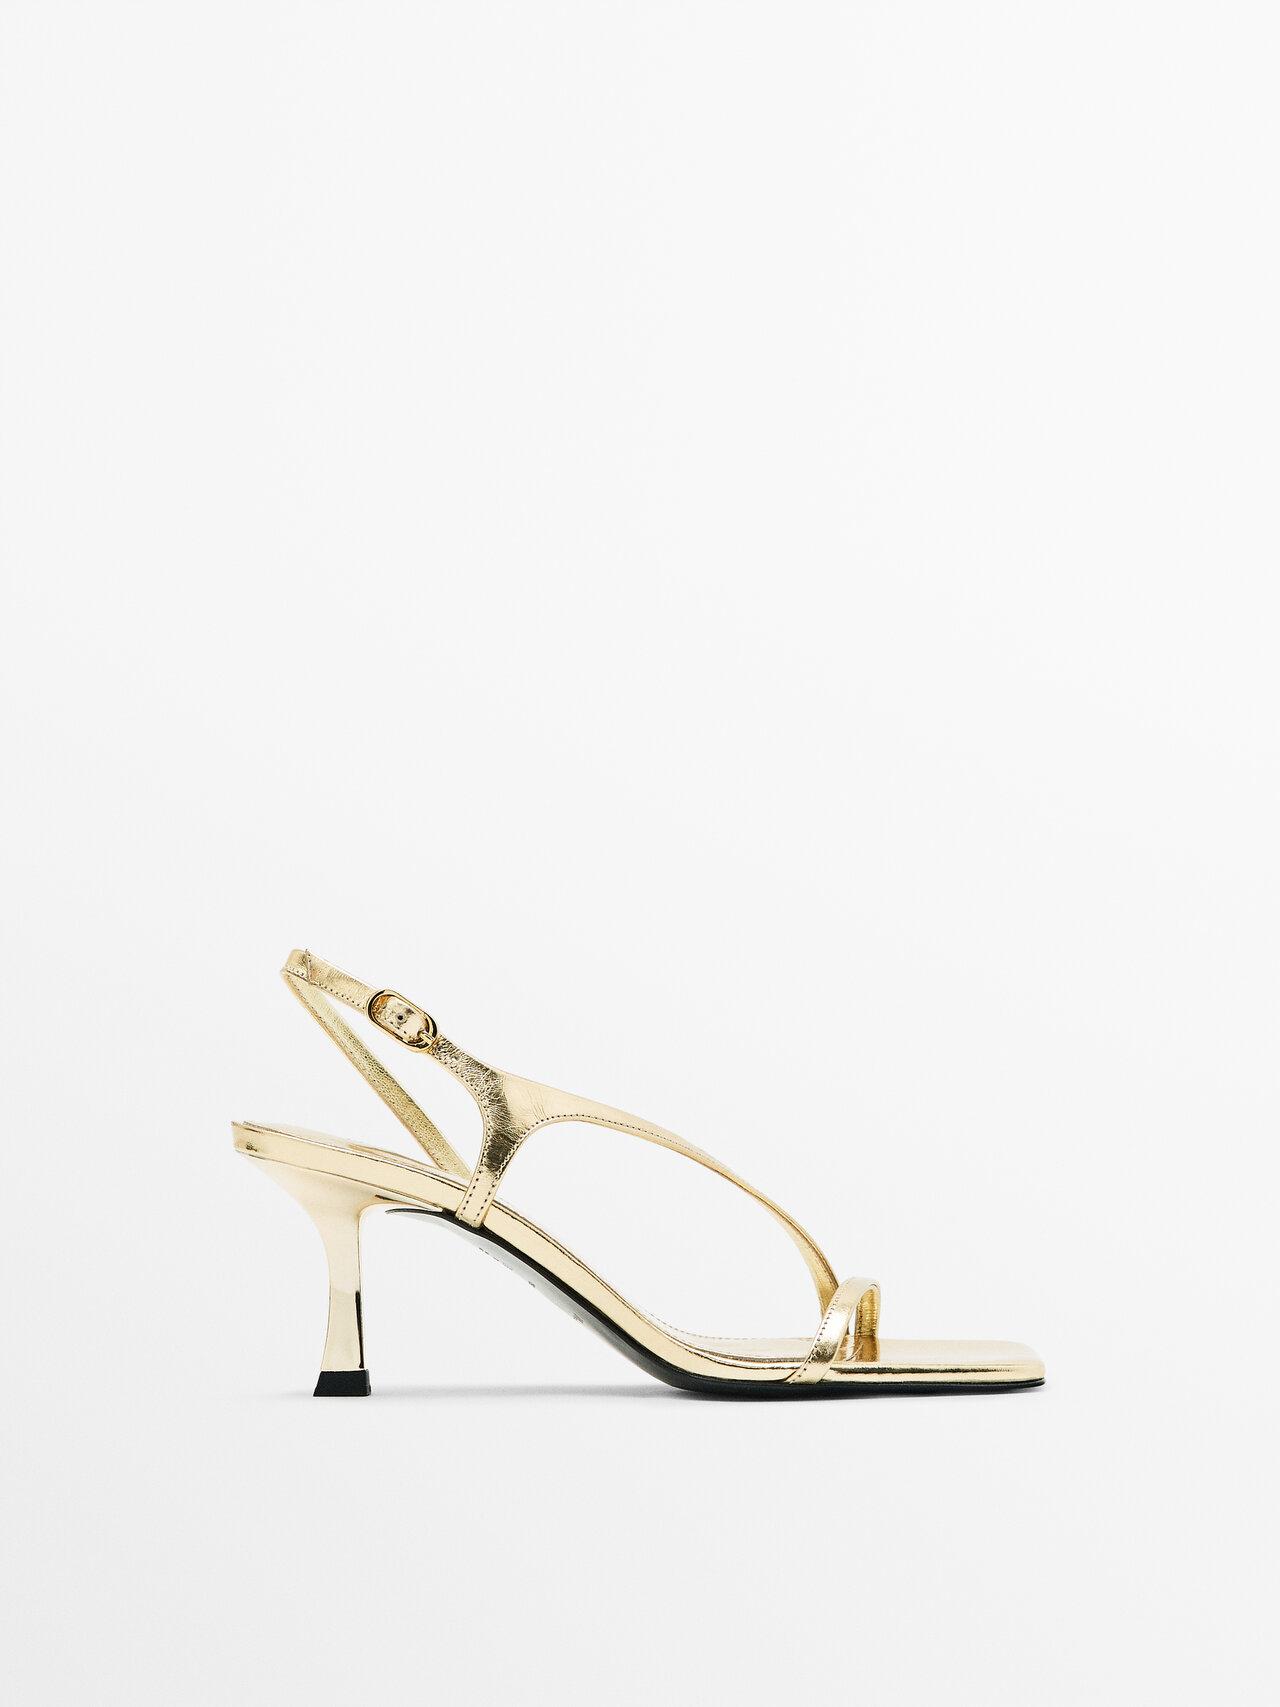 MASSIMO DUTTI Metallic Leather Heeled Sandals in White | Lyst